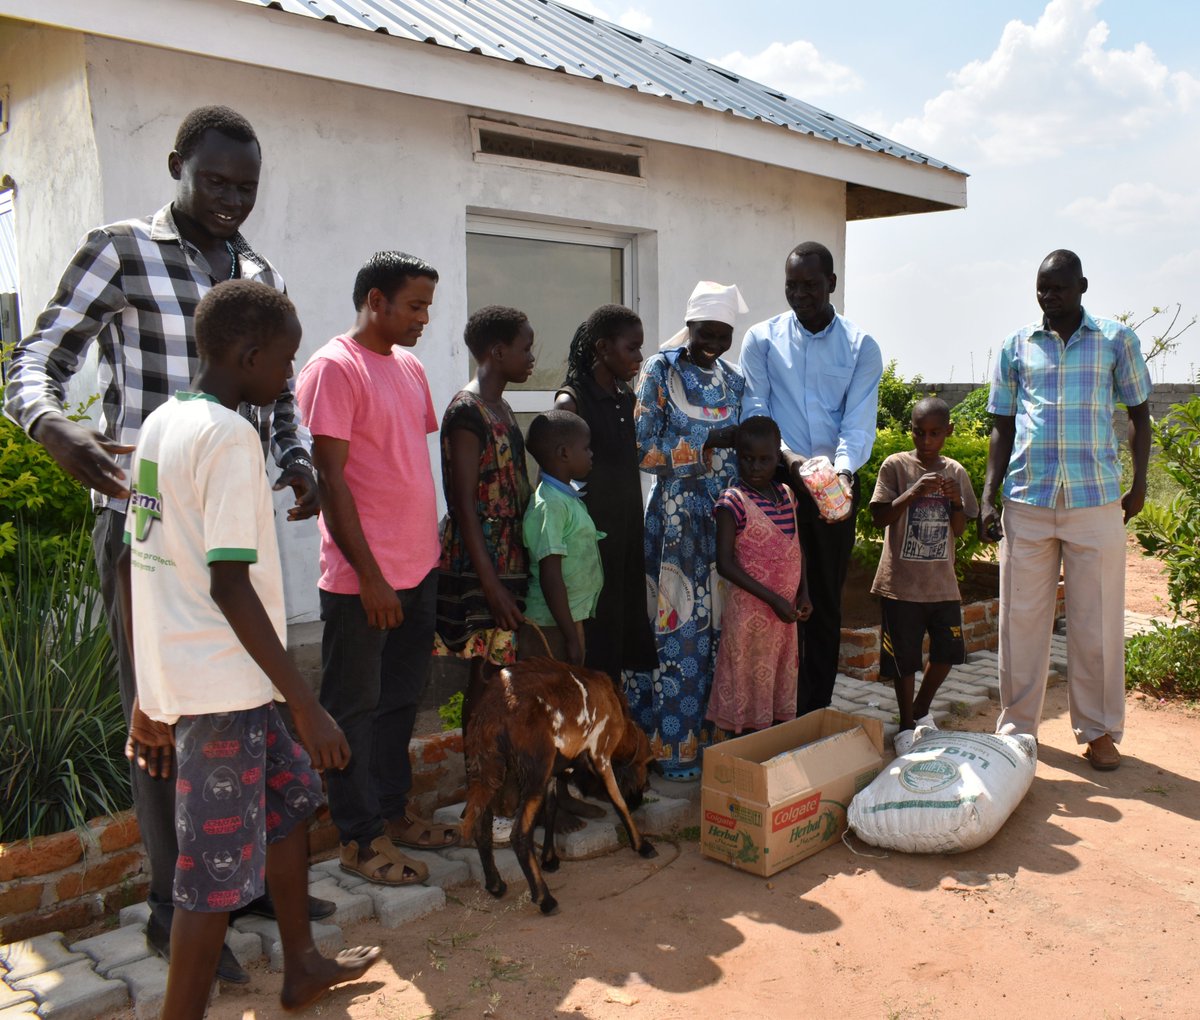 Juba Orphanage Centre hit by unavailability of basic necessities